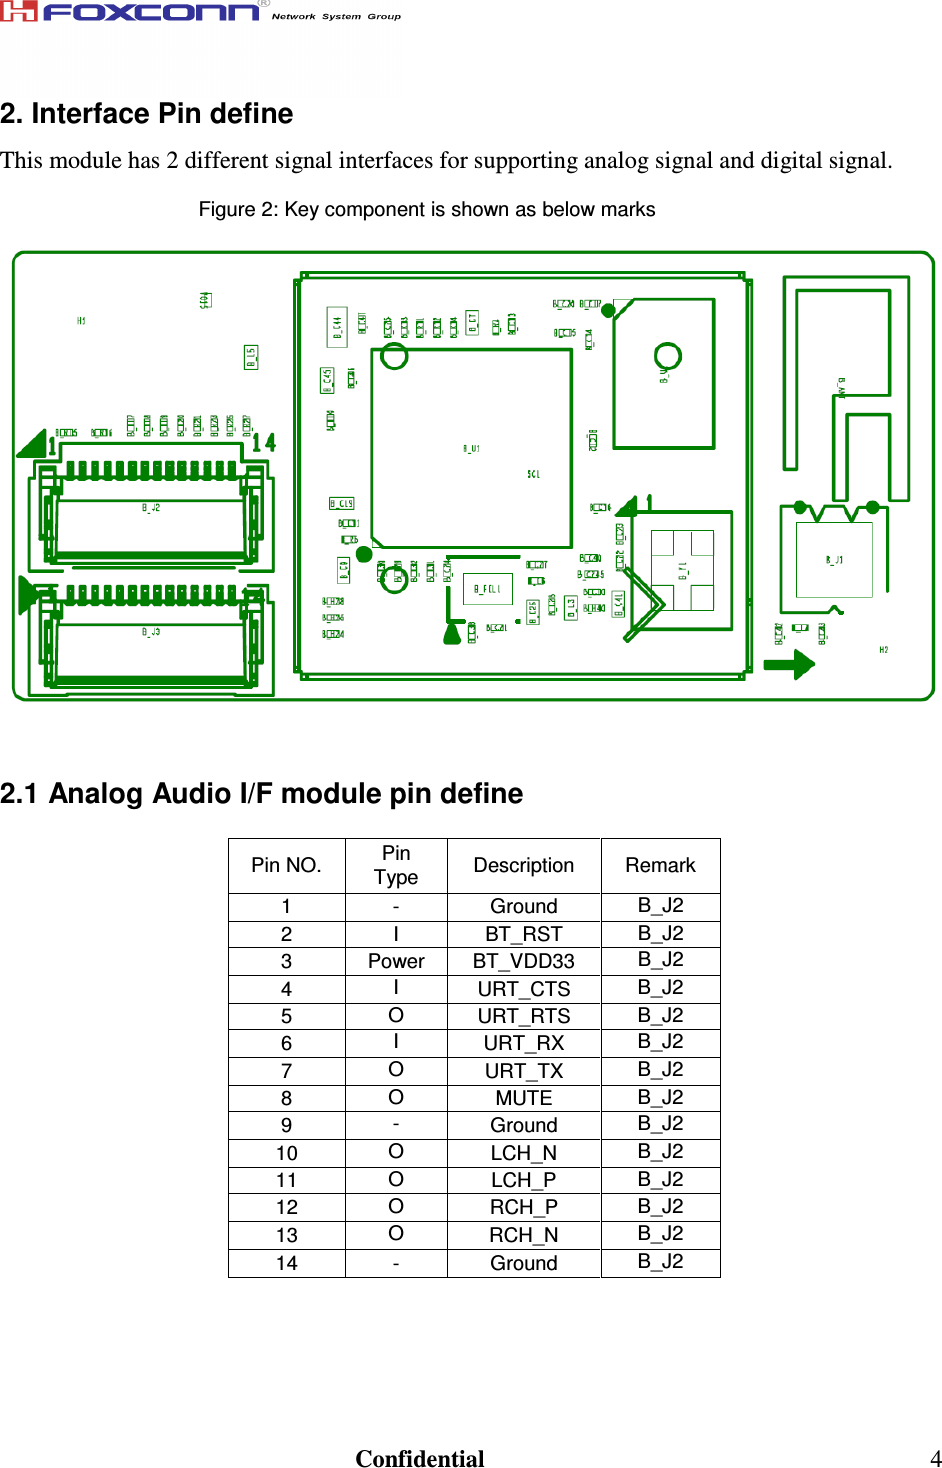                                                                               Confidential  4 2. Interface Pin define This module has 2 different signal interfaces for supporting analog signal and digital signal.   Figure 2: Key component is shown as below marks      2.1 Analog Audio I/F module pin define  Pin NO.  Pin Type  Description  Remark 1  -  Ground  B_J2 2  I  BT_RST  B_J2 3  Power  BT_VDD33  B_J2 4  I URT_CTS  B_J2 5  O URT_RTS  B_J2 6  I URT_RX  B_J2 7  O URT_TX  B_J2 8  O MUTE  B_J2 9  - Ground  B_J2 10  O LCH_N  B_J2 11  O LCH_P  B_J2 12  O RCH_P  B_J2 13  O RCH_N  B_J2 14  -  Ground  B_J2      